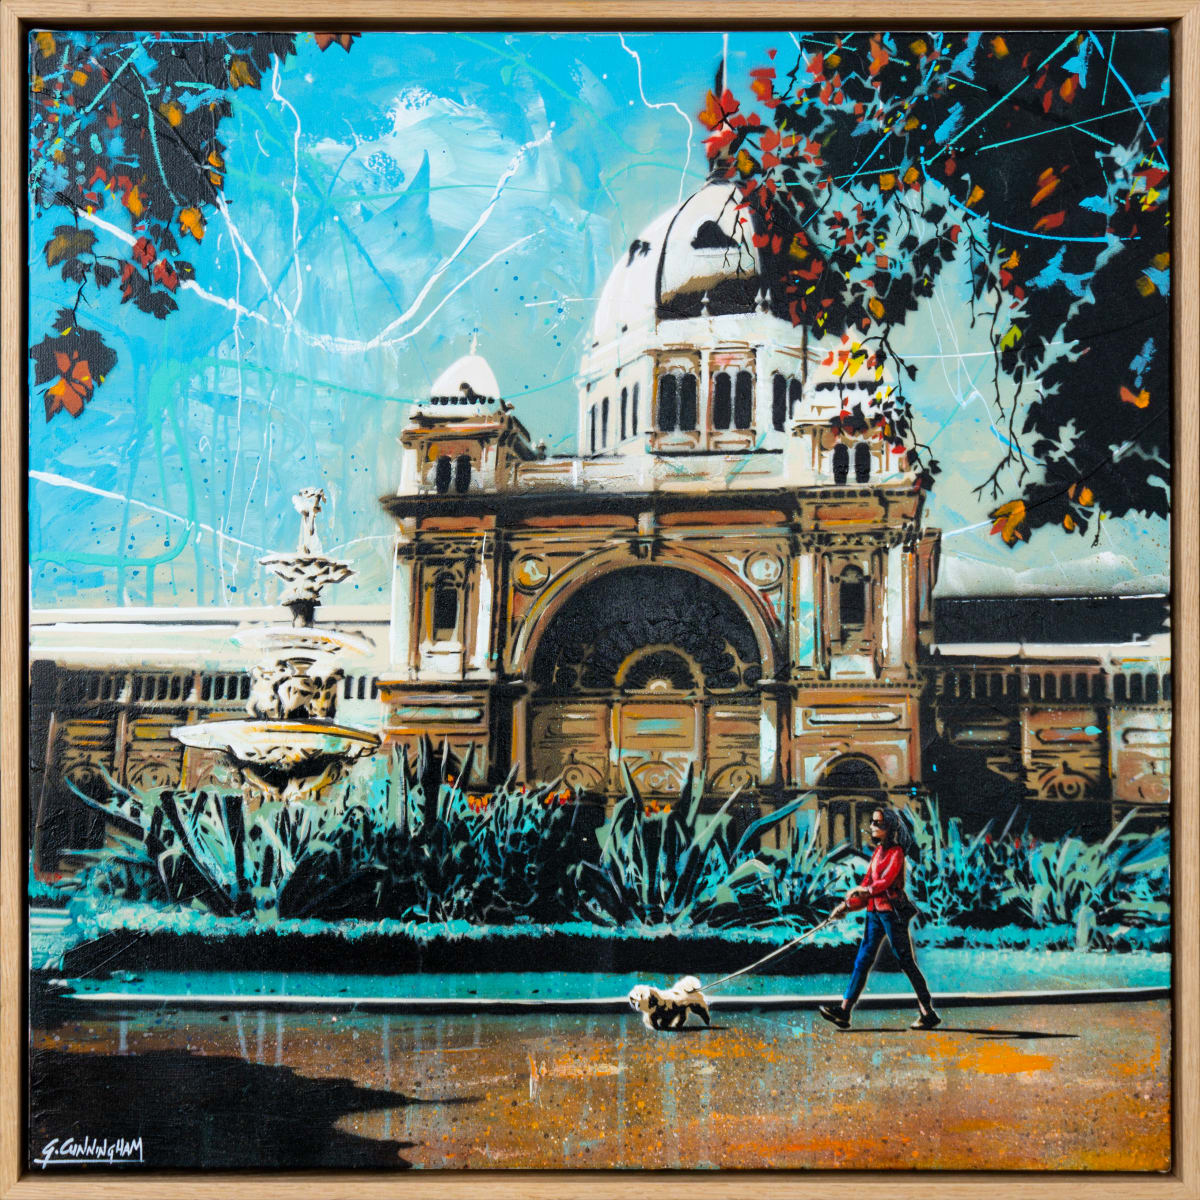 Sunday Afternoon by Geoff Cunningham  Image: The Exhibition Building in Carlton Gardens is a beautiful example of 18th century architecture, and the surrounding gardens are in constant use by Melbournians for picnics, exercise and of course dog walking!